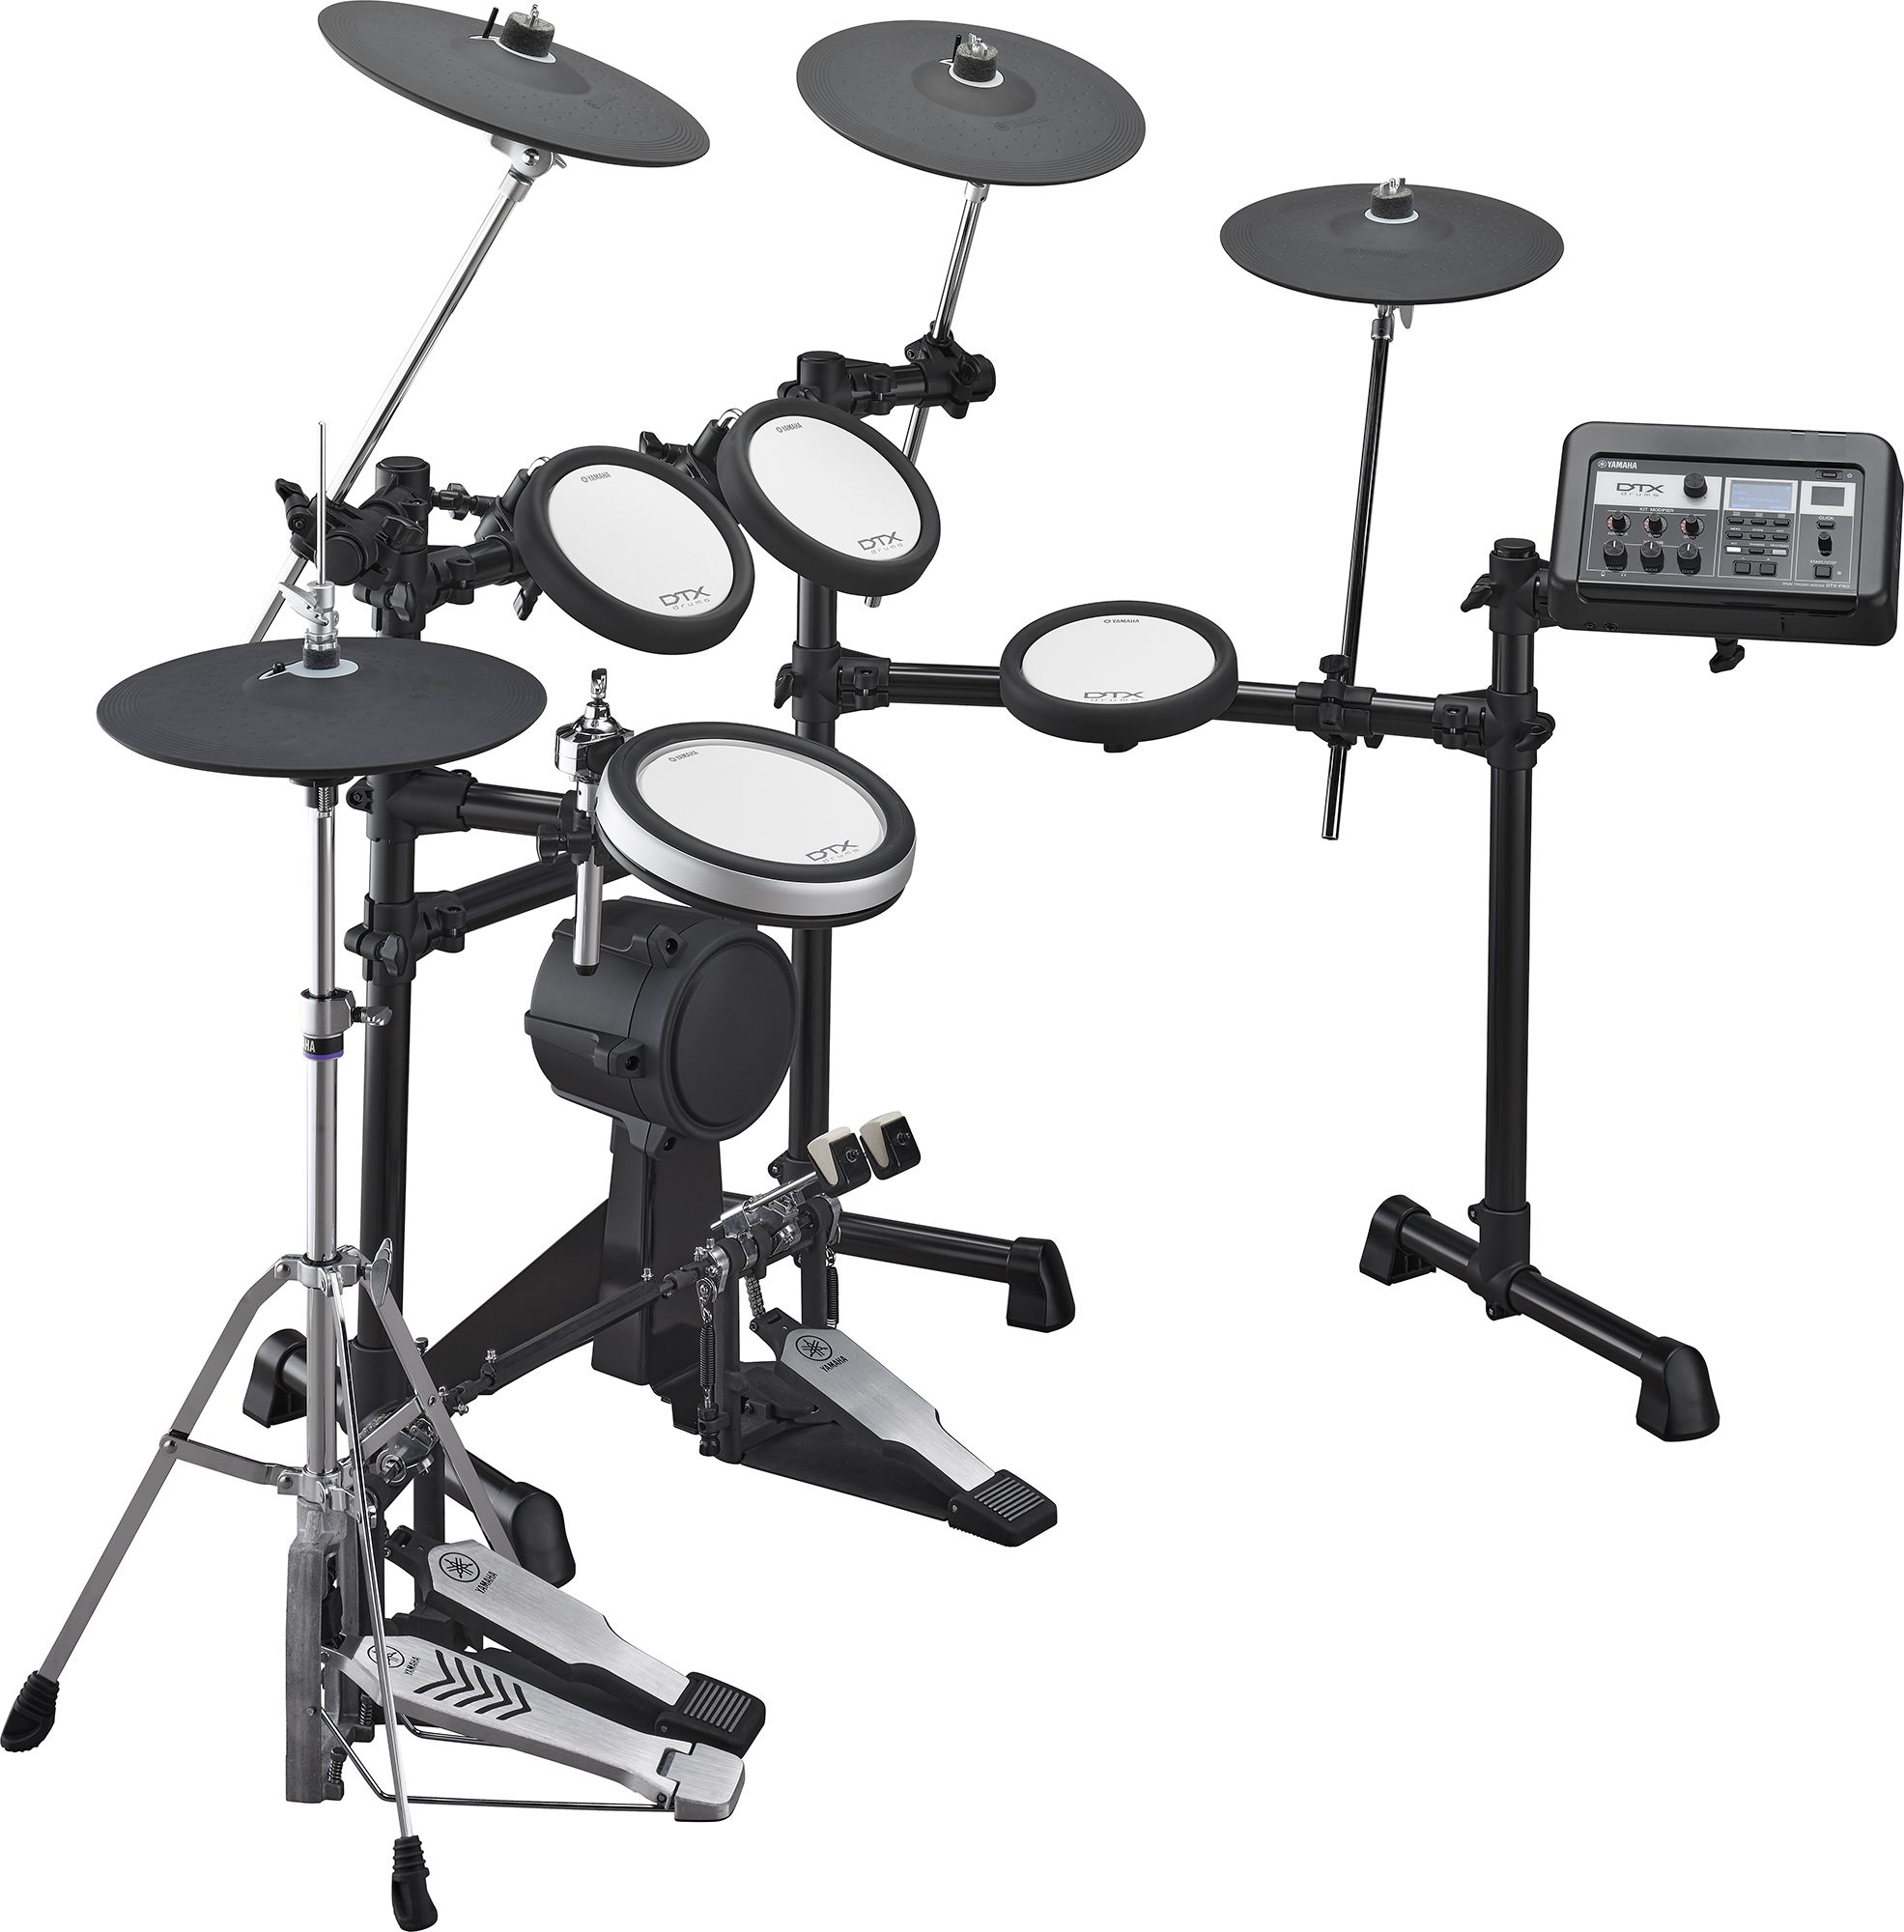 - - America / - Products Products Electronic Latin Musical Middle Oceania Drum Asia / - East Drums / / Electronic - DTX6 Yamaha Kits Instruments Africa - / Series Drums CIS - -